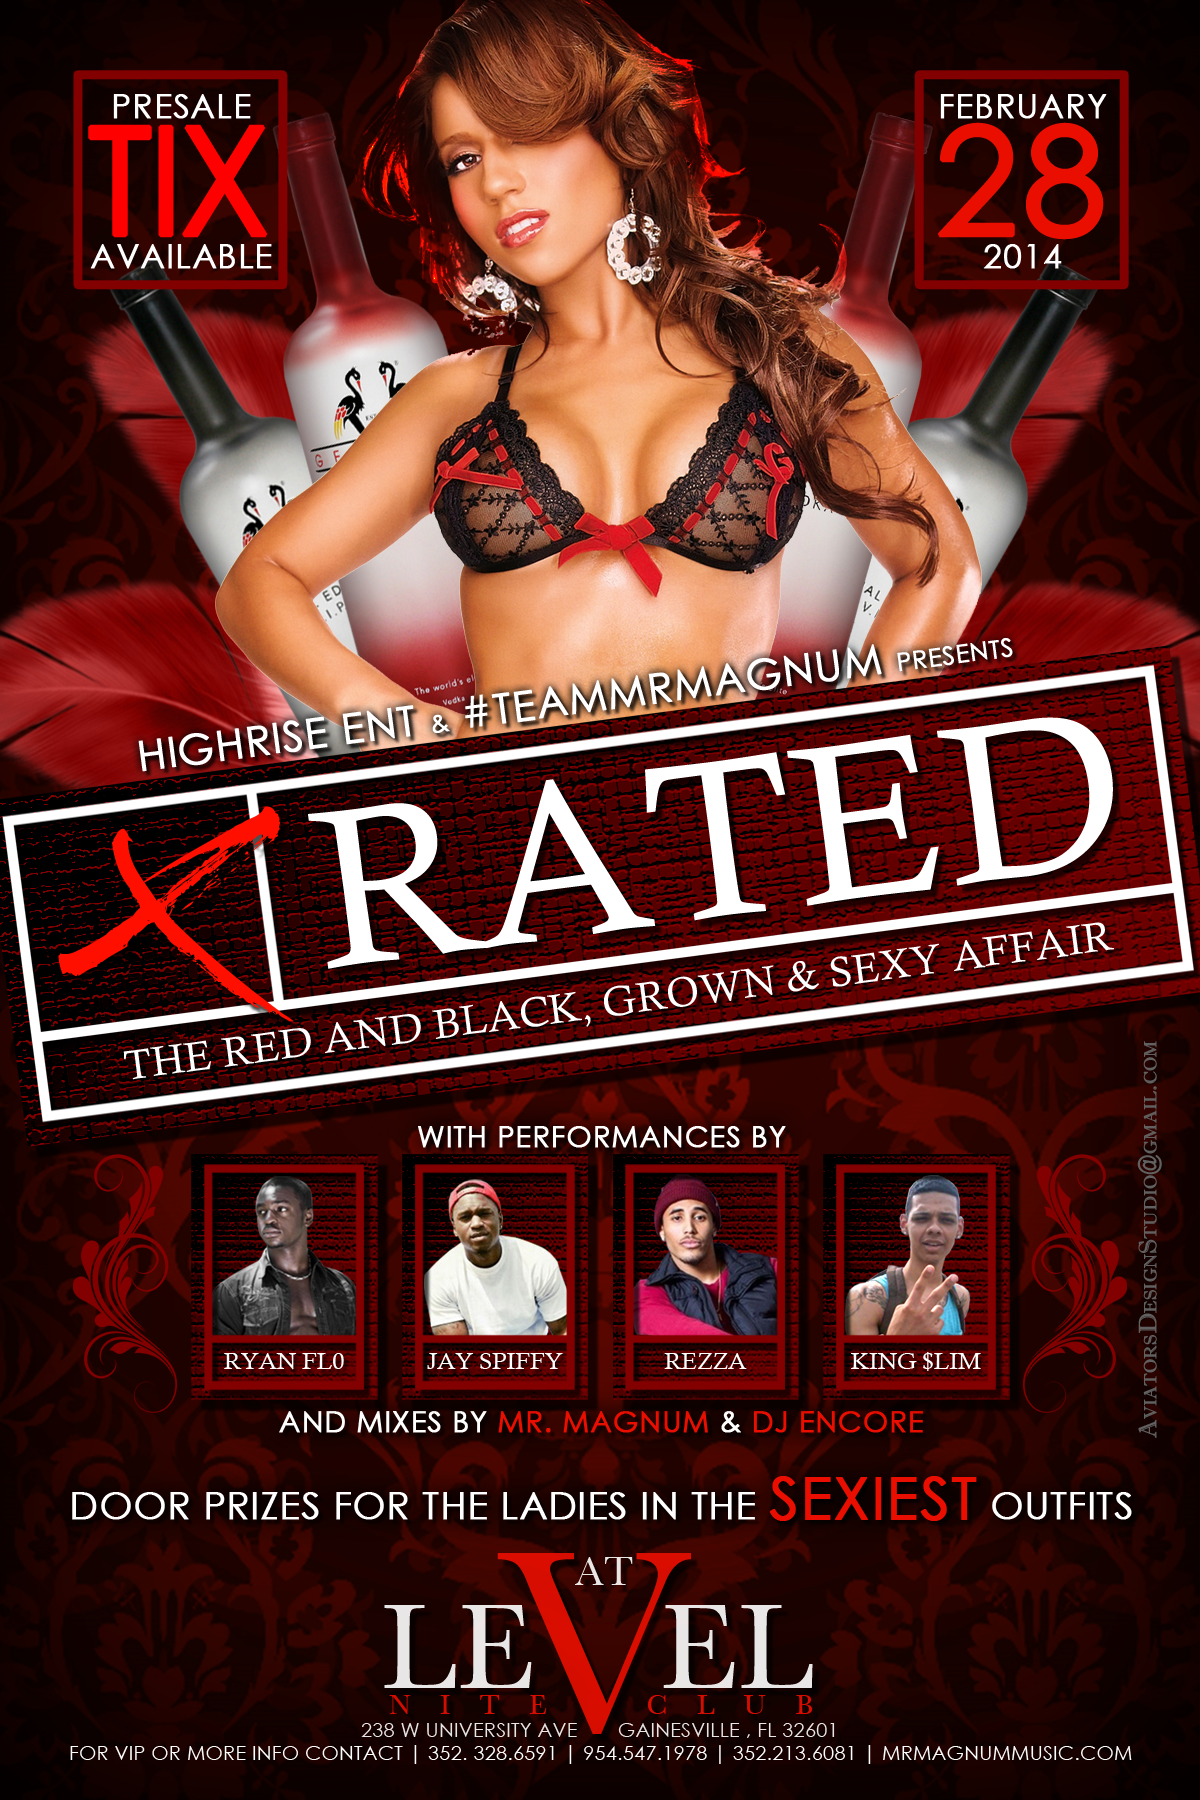 X-Rated: The Sexy Red & Black Affair presented by Highrise Ent. and Team Mr. Magnum